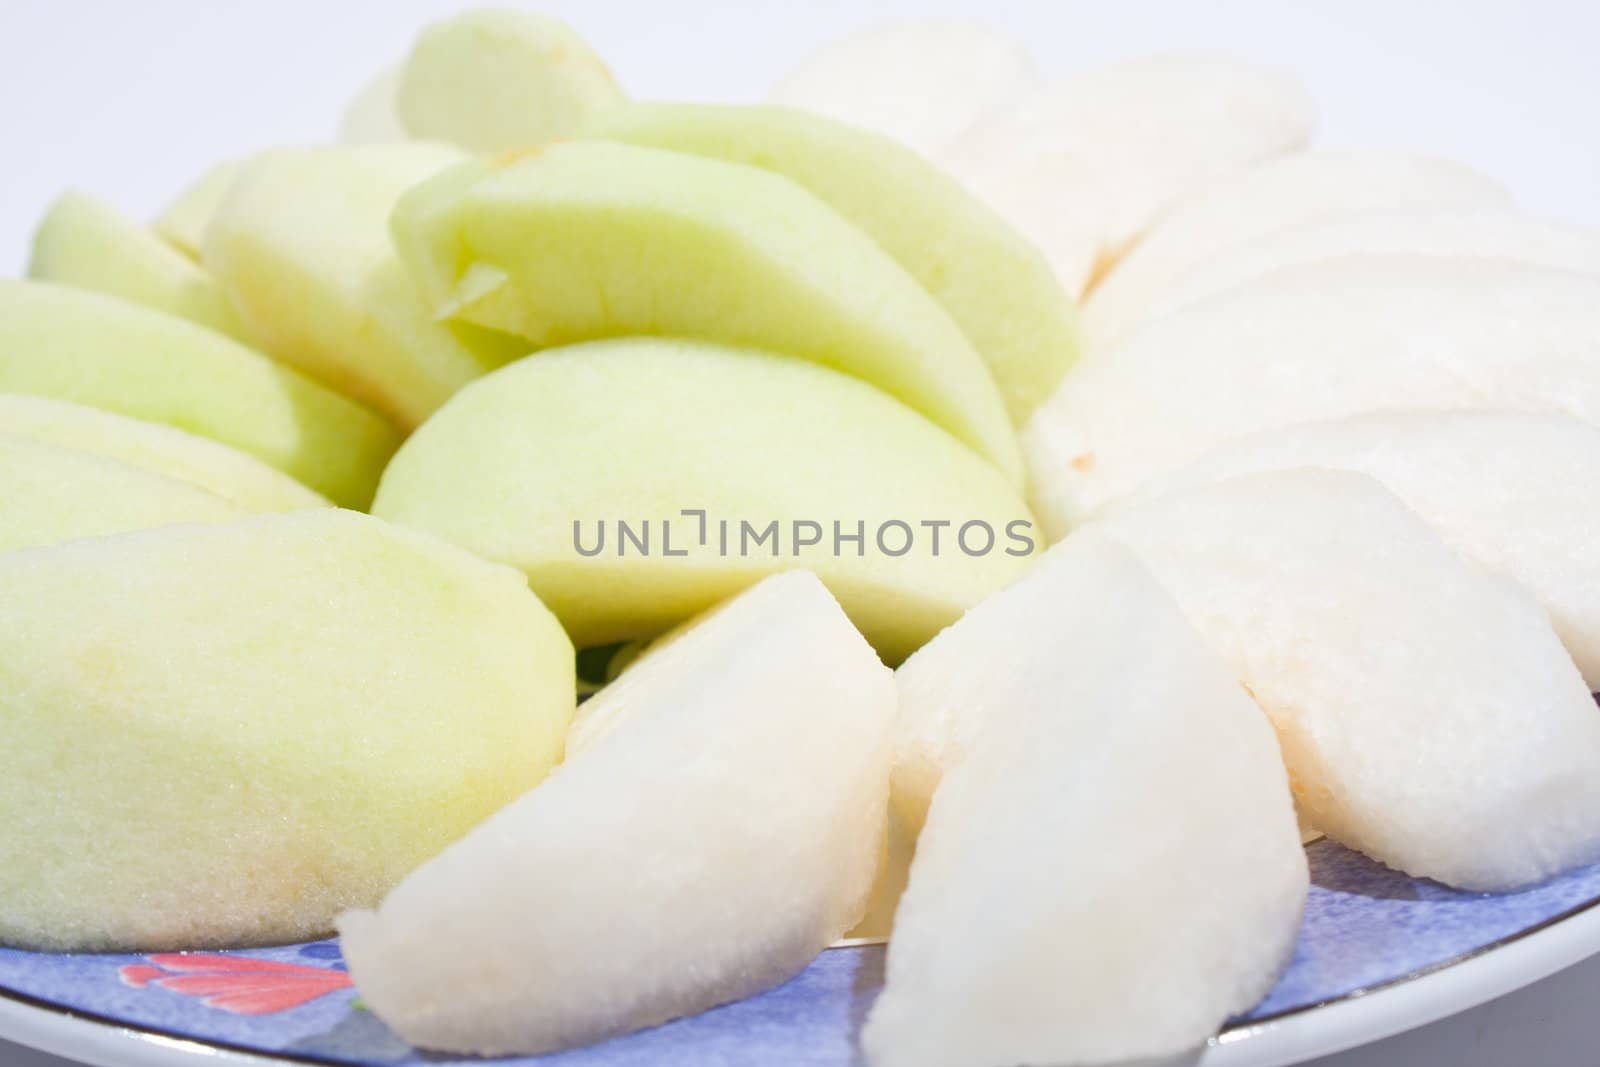 Apples, peeled and wheat. Sort palatable Arranged on the plate insert. On a white background.